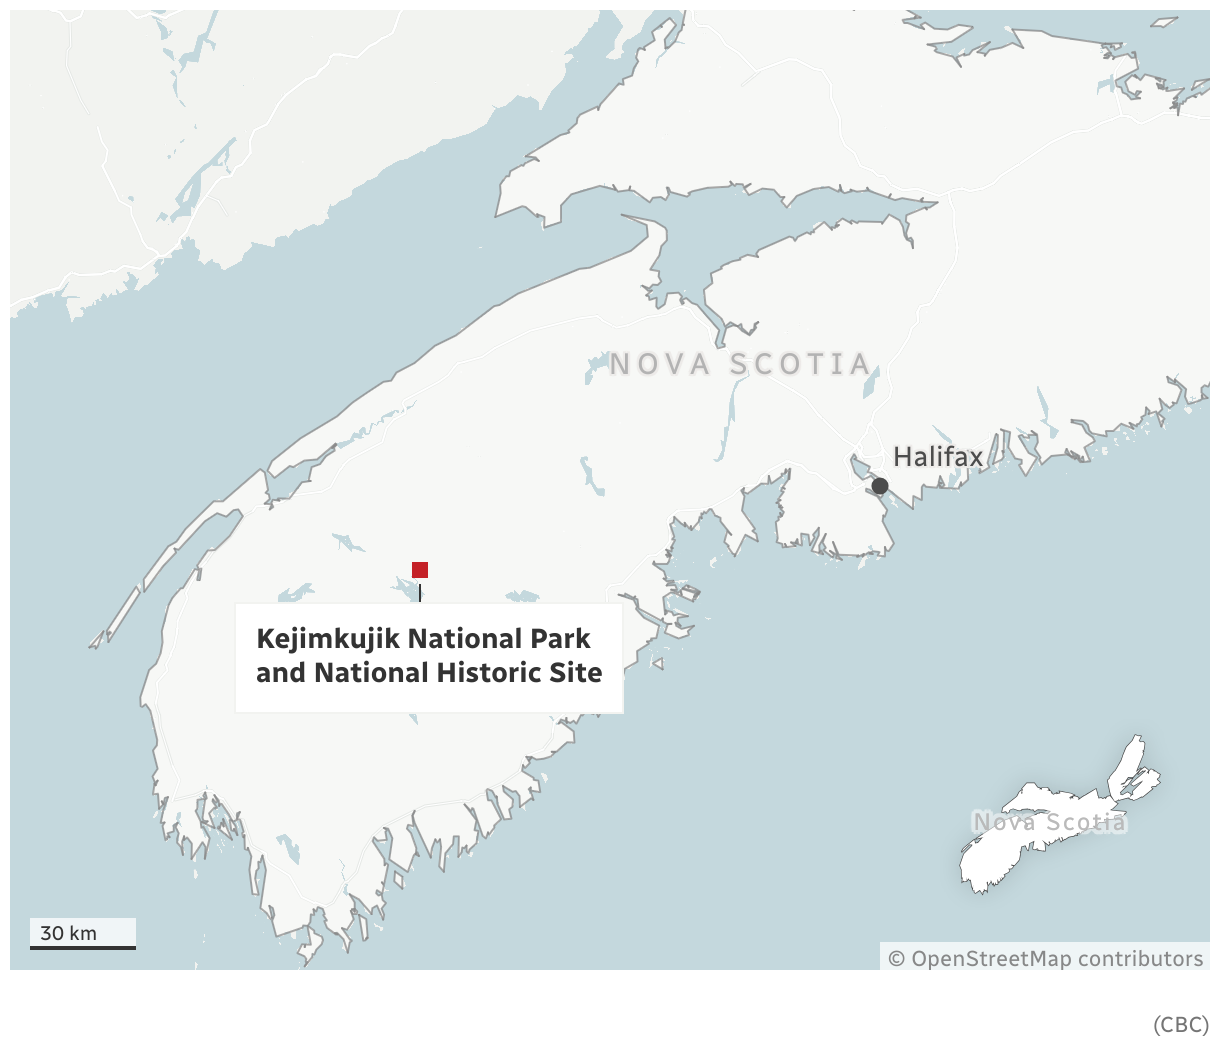 A locator map in neutral grey-blue hues locating Kejimkujik National Park and the city of Halifax in the province of Nova Scotia. There is also a shape of the province of Nova Scotia in the far right with a red rectangle depicting the boundaries of the larger map.